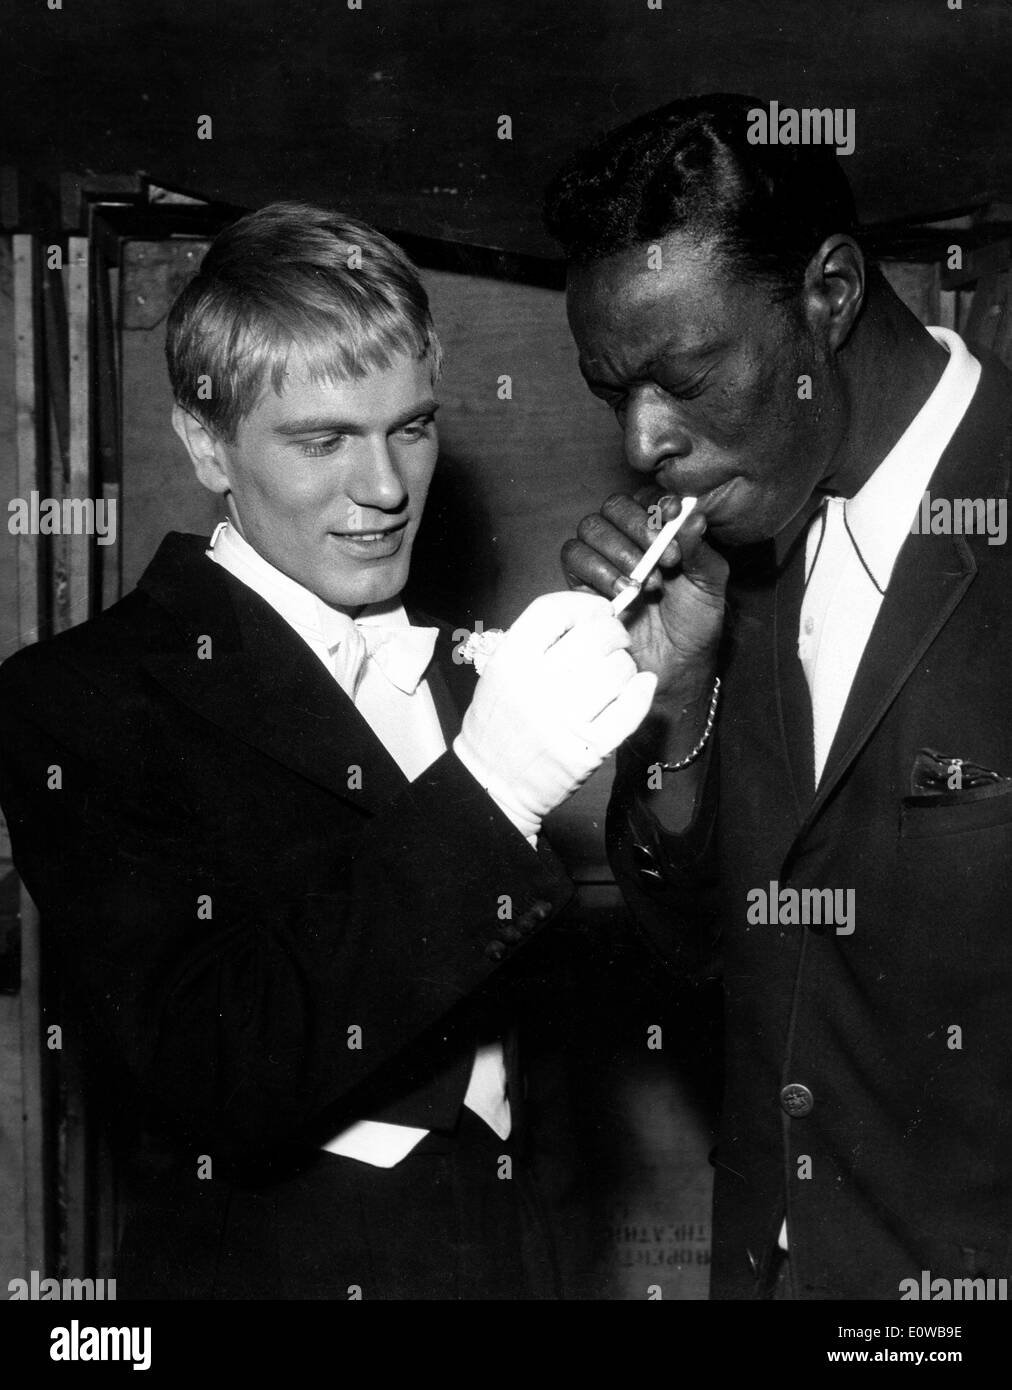 Musician Nat King Cole getting his cigarette lit Stock Photo